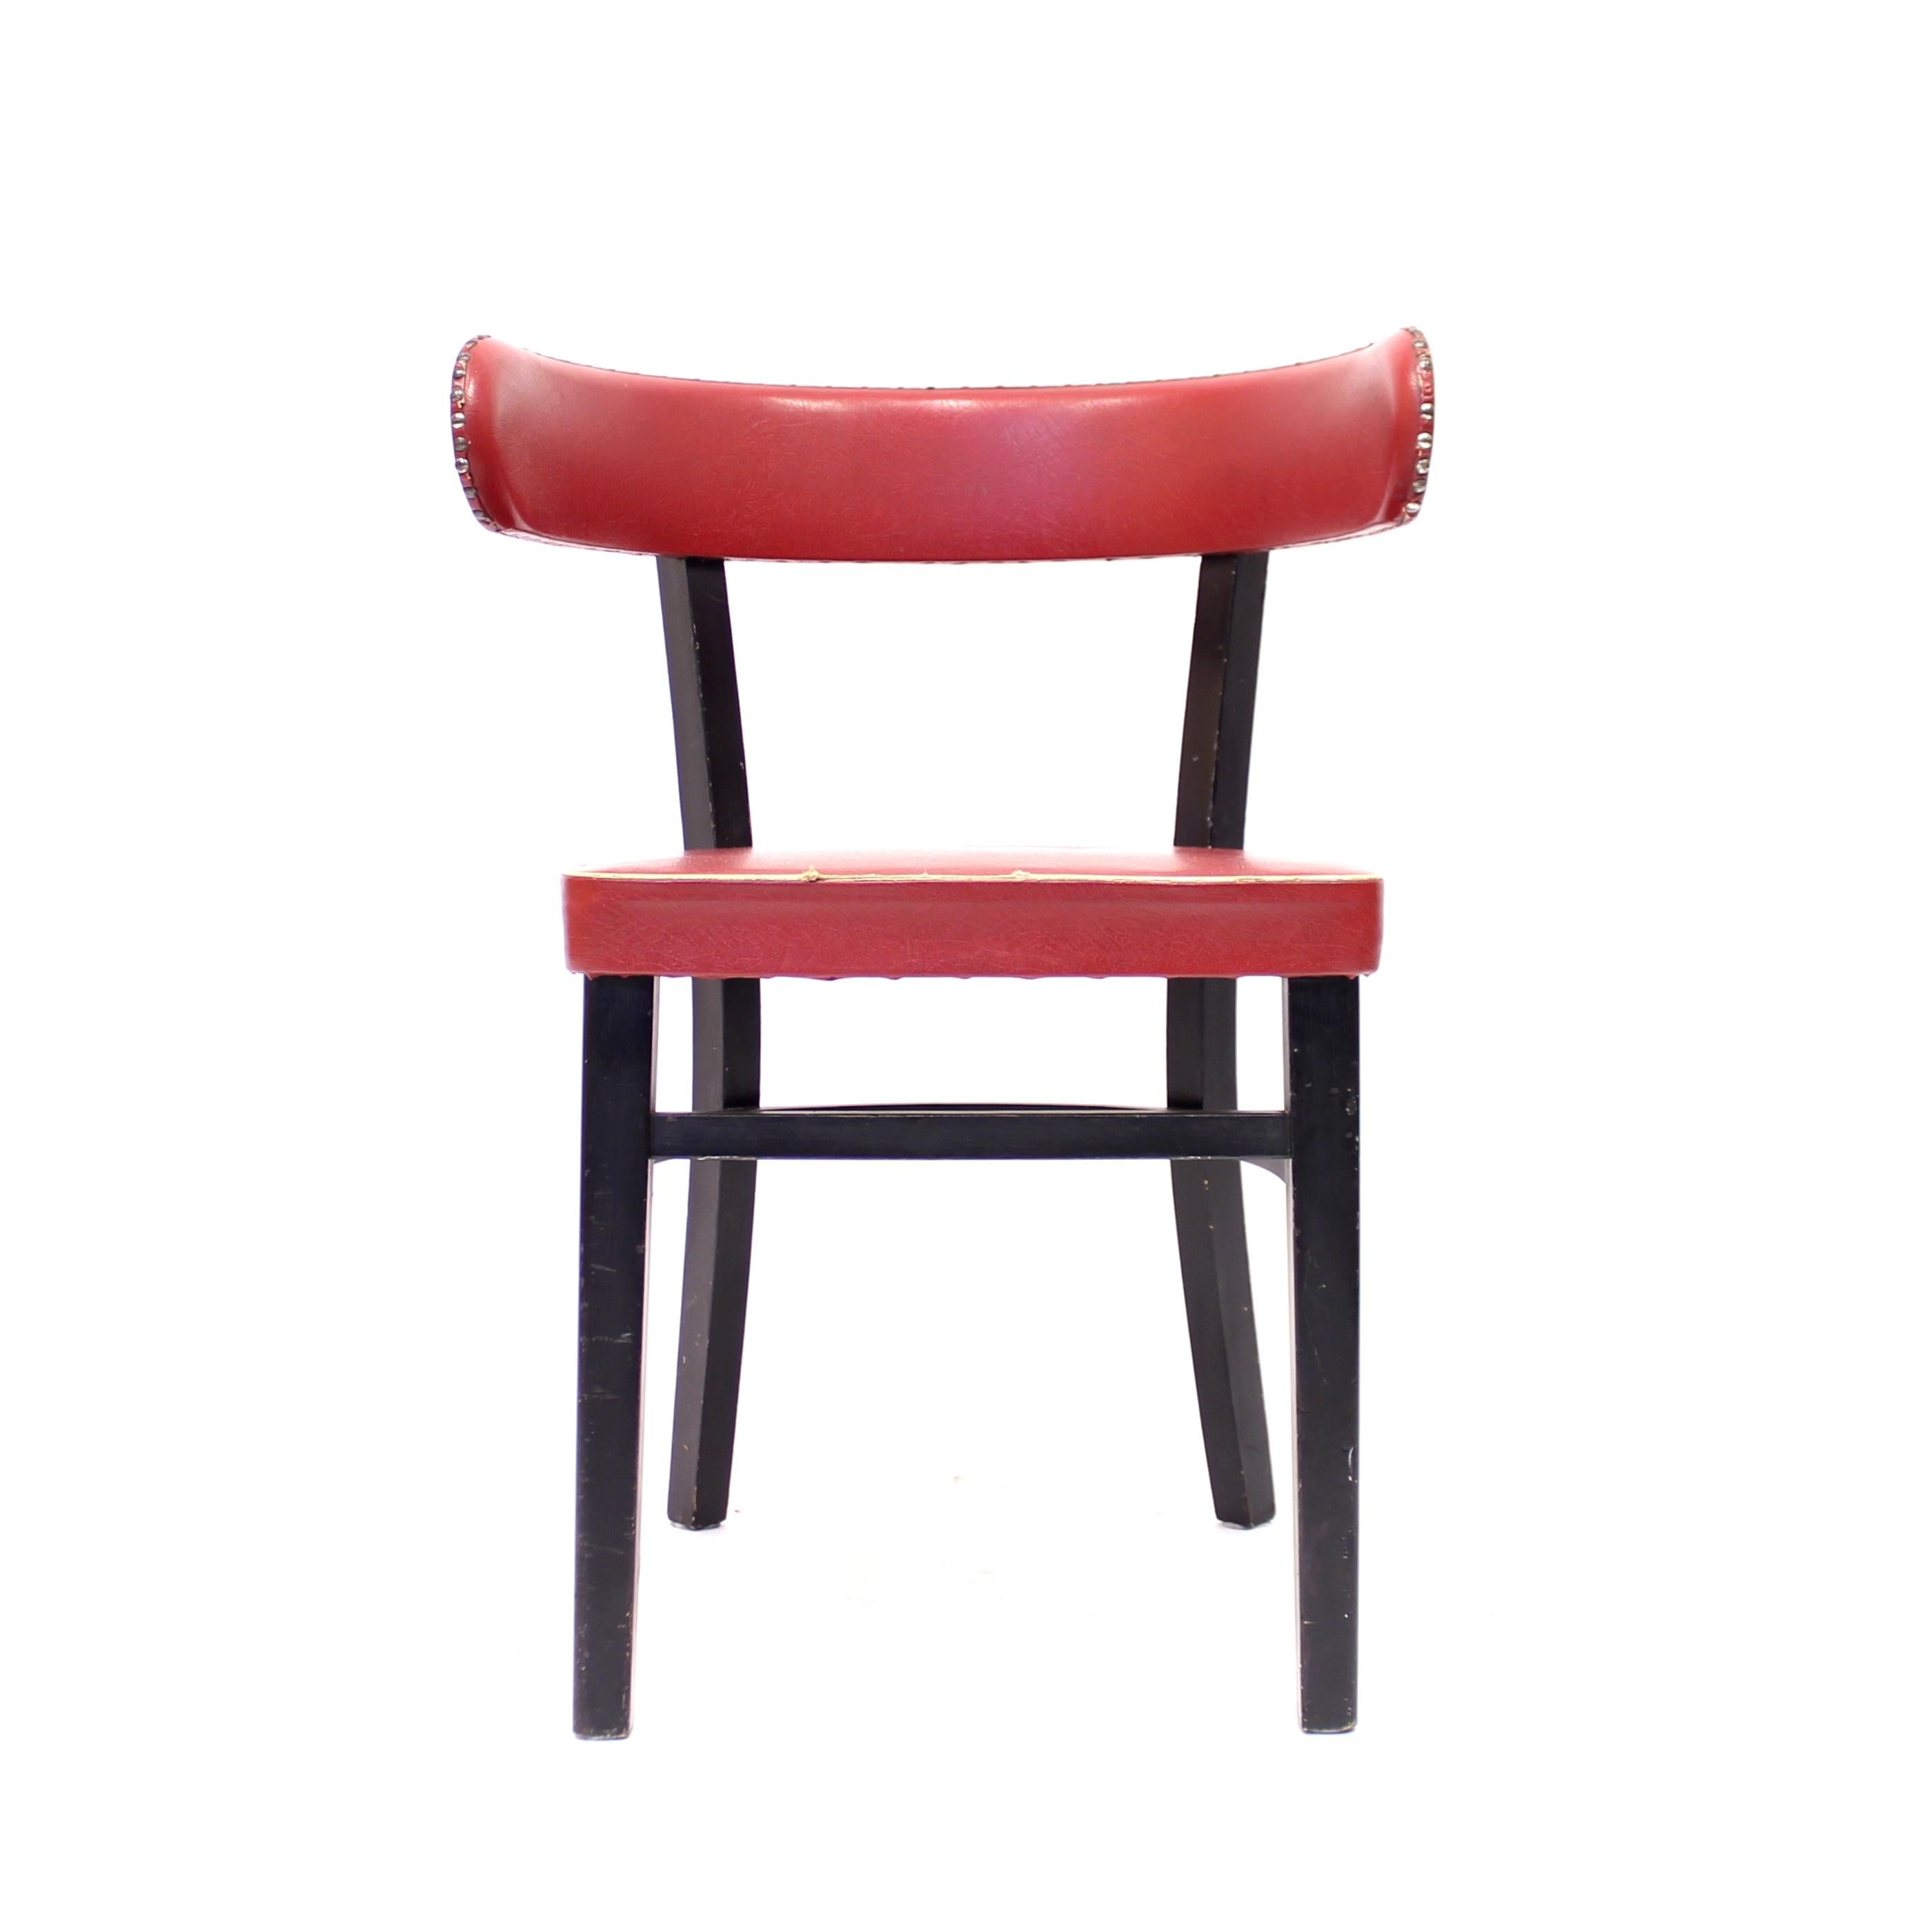 A so called hugging chair designed by Finish designer Werner West in the 1940s and manufactured by Wilhelm Schauman in the town Jyväskyle in the middle of Finland. The design of the back is heavily inspired by the Greek Klismos chairs. The frame is